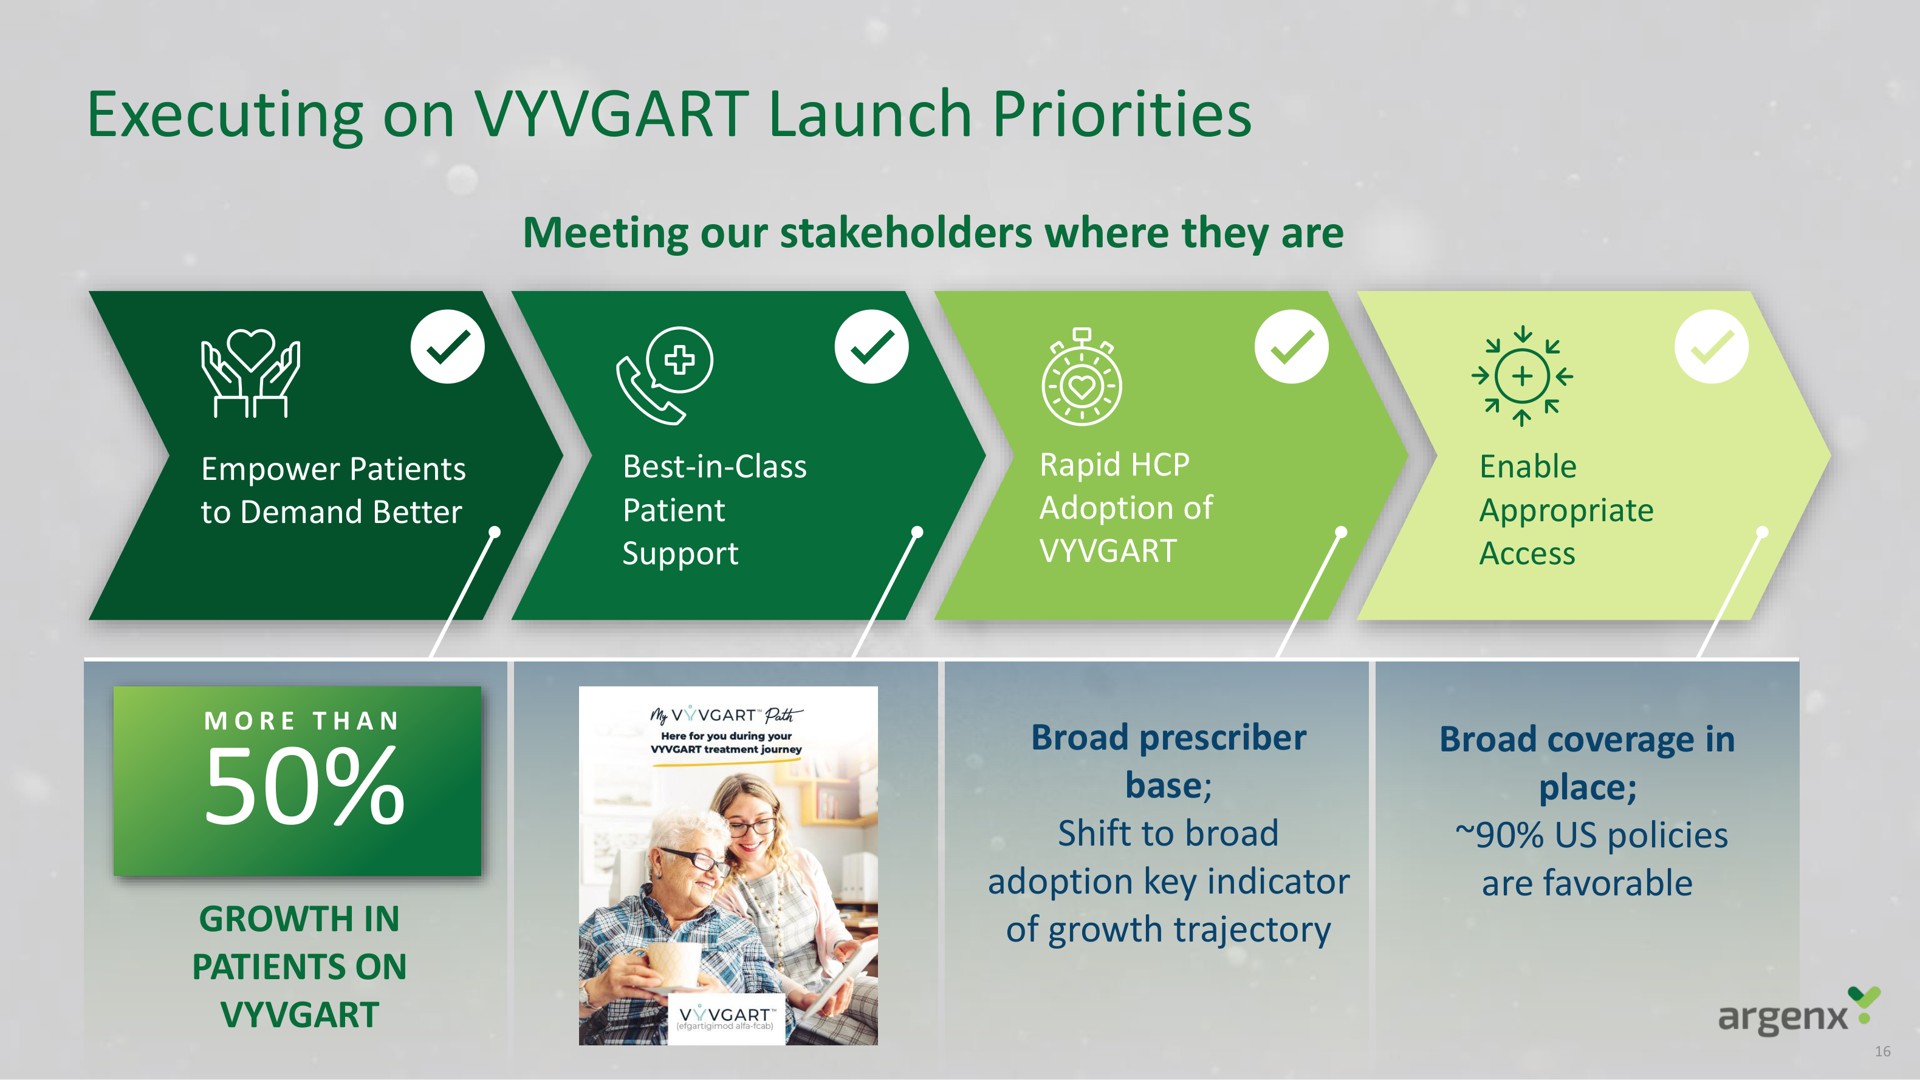 executing on launch priorities a i cor | argenx SE